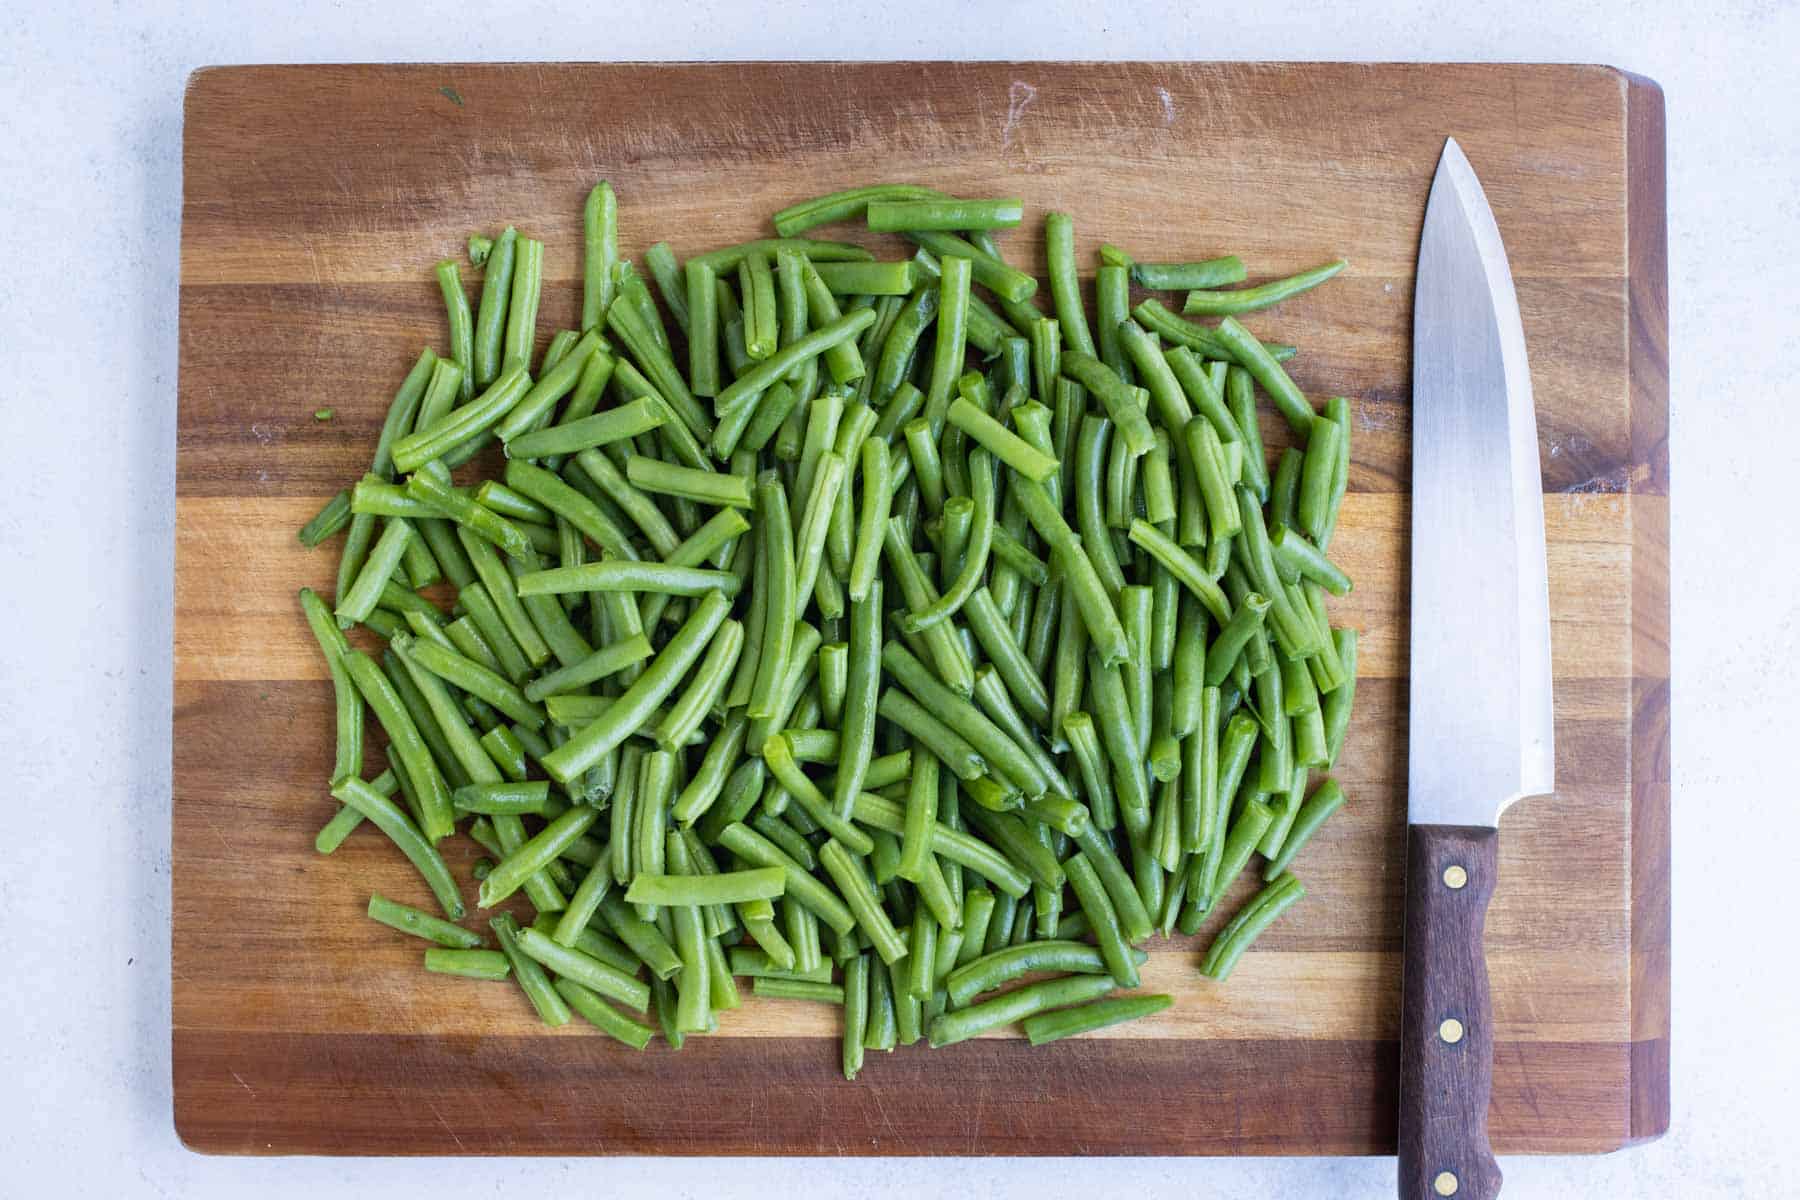 Trimmed and cut green beans are ready for the casserole.